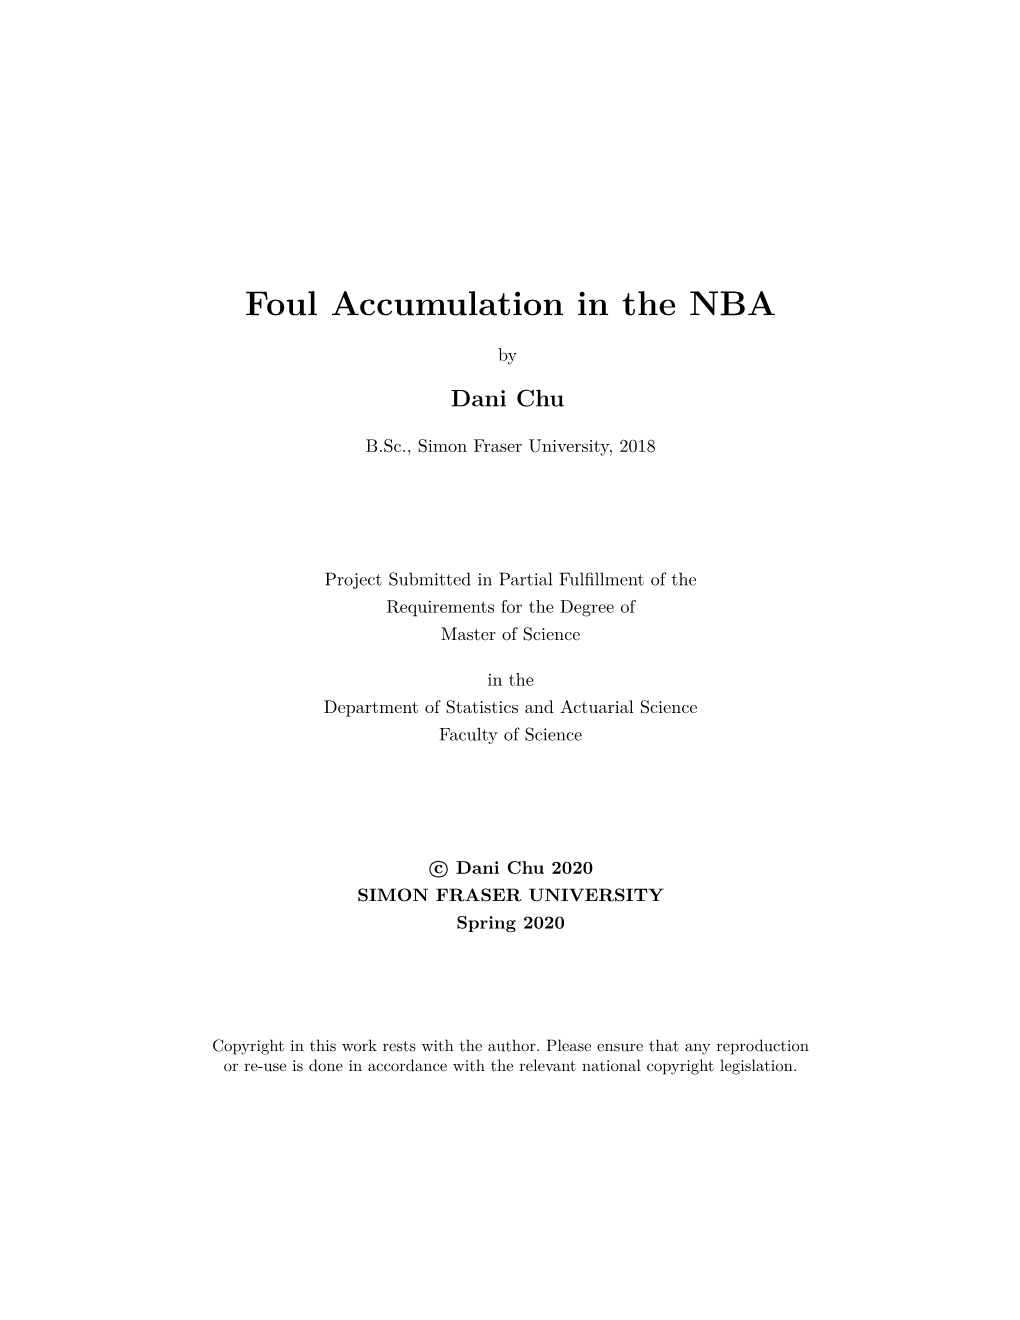 Foul Accumulation in the NBA